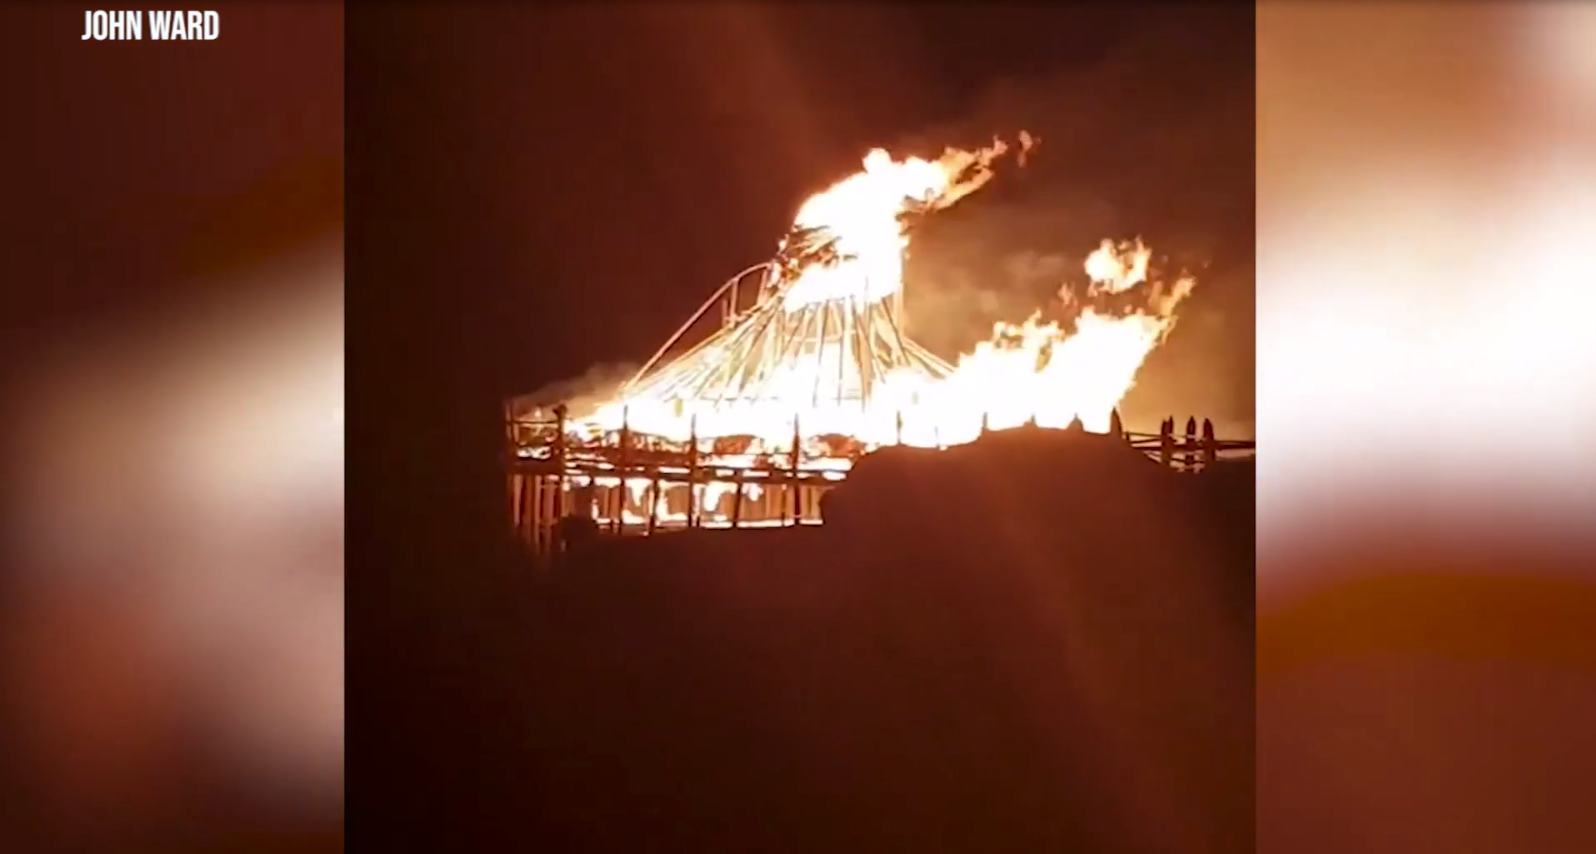 Flames engulfed the roundhouse structure at the Scottish Crannog Centre on Friday evening